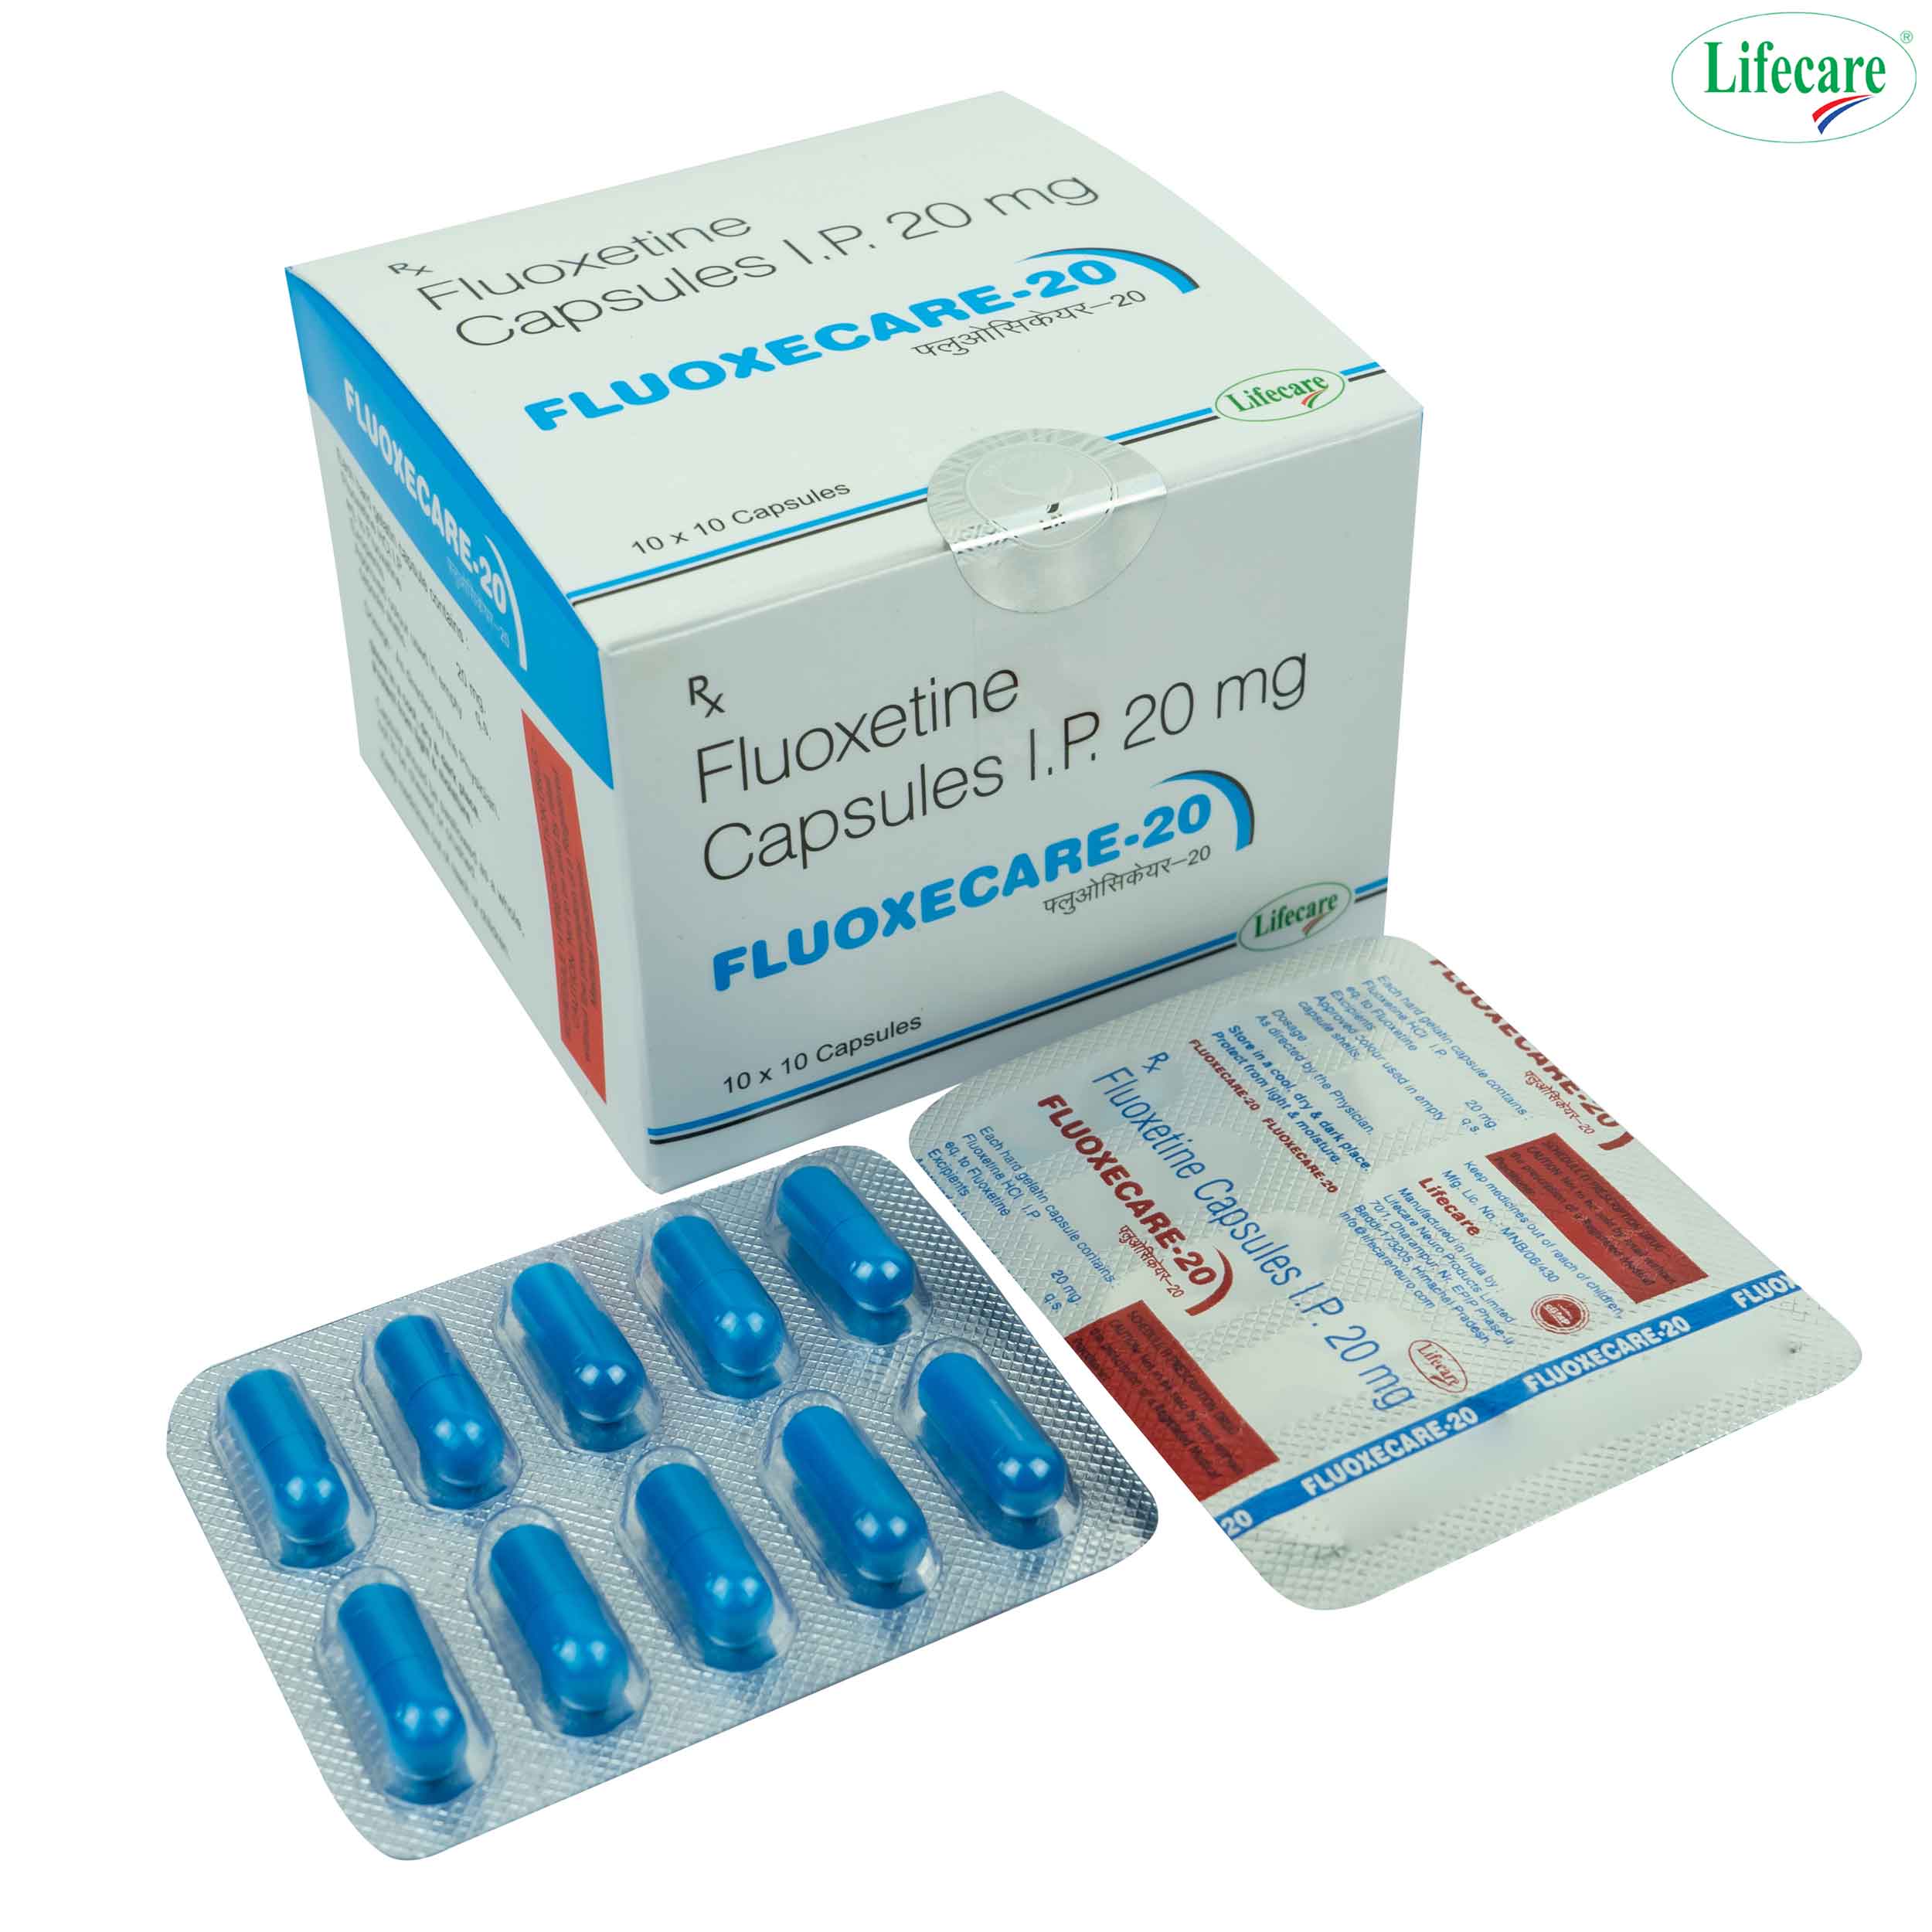 Fluoxetine 20 mg and Alprazolam 0.25 Tablets